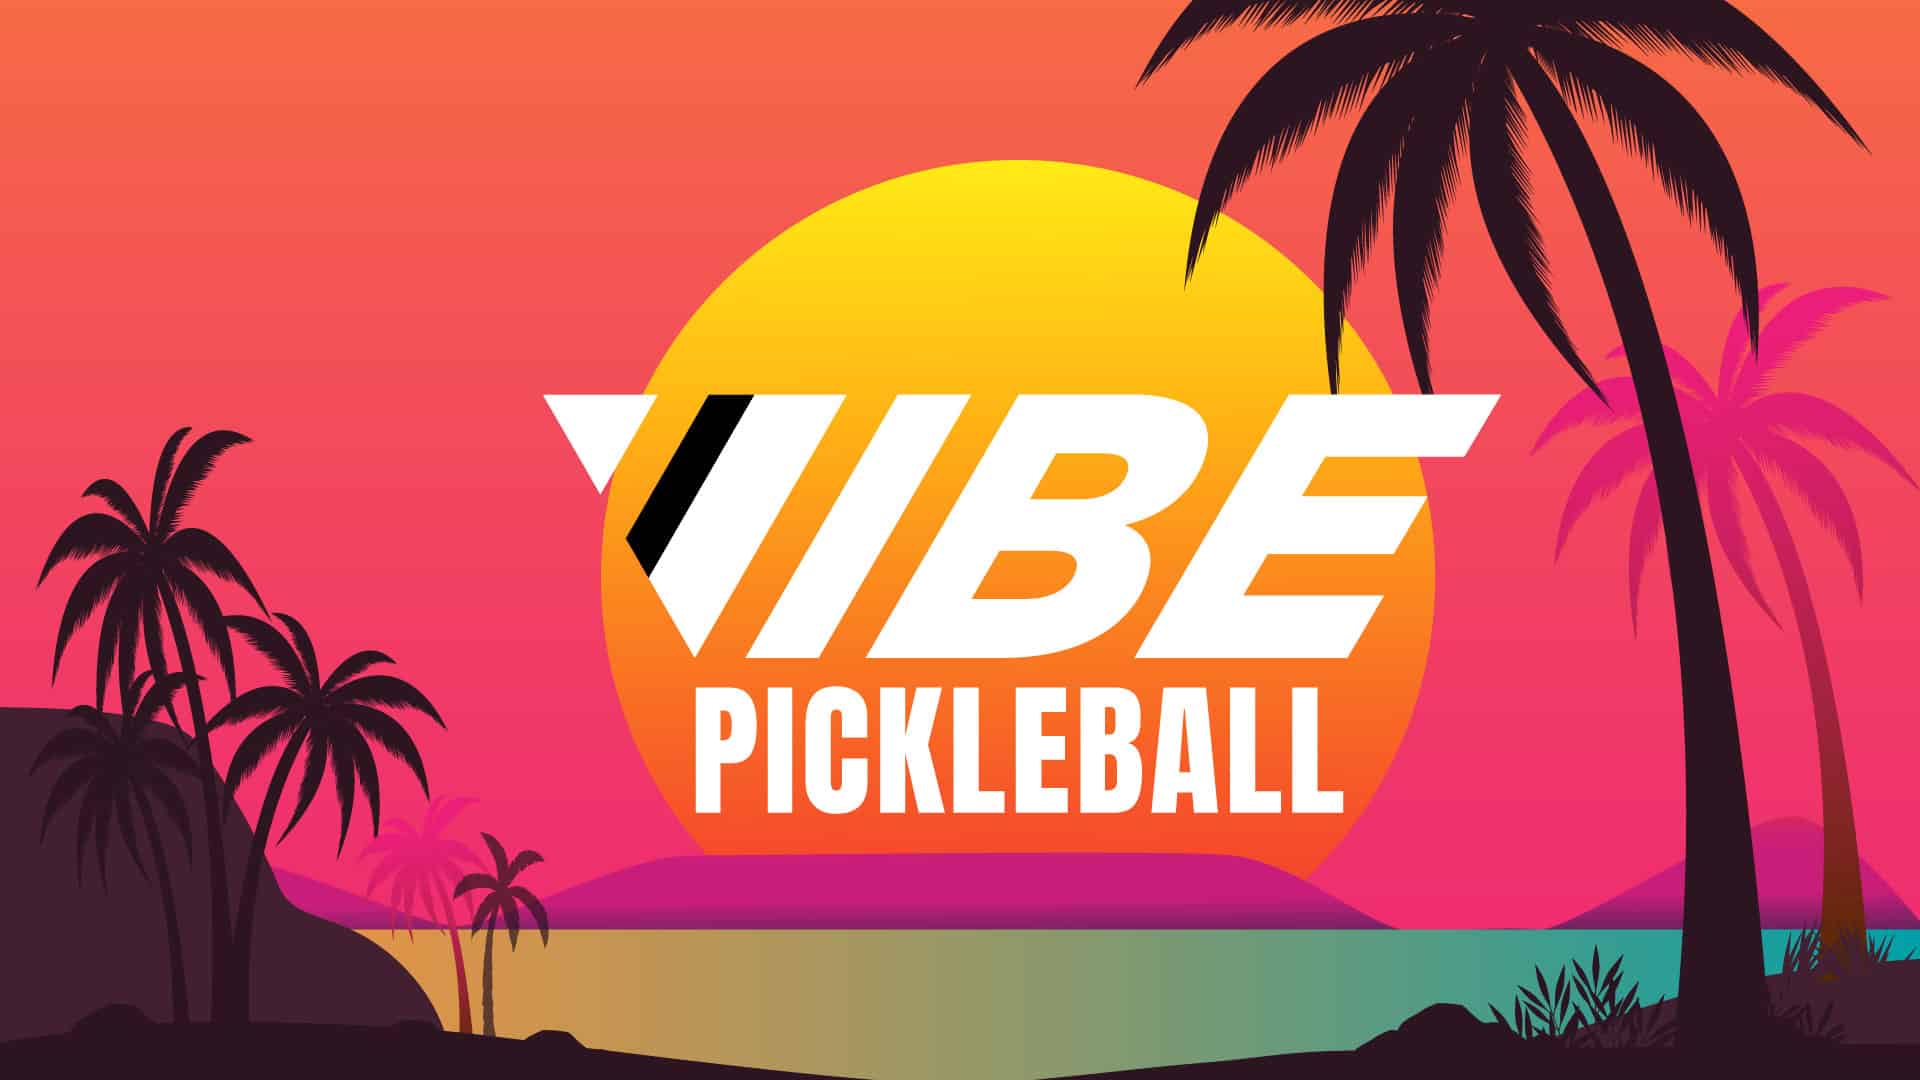 Pickleball Tour Wars: Complete Chaos Breaks Out in Pro Pickleball